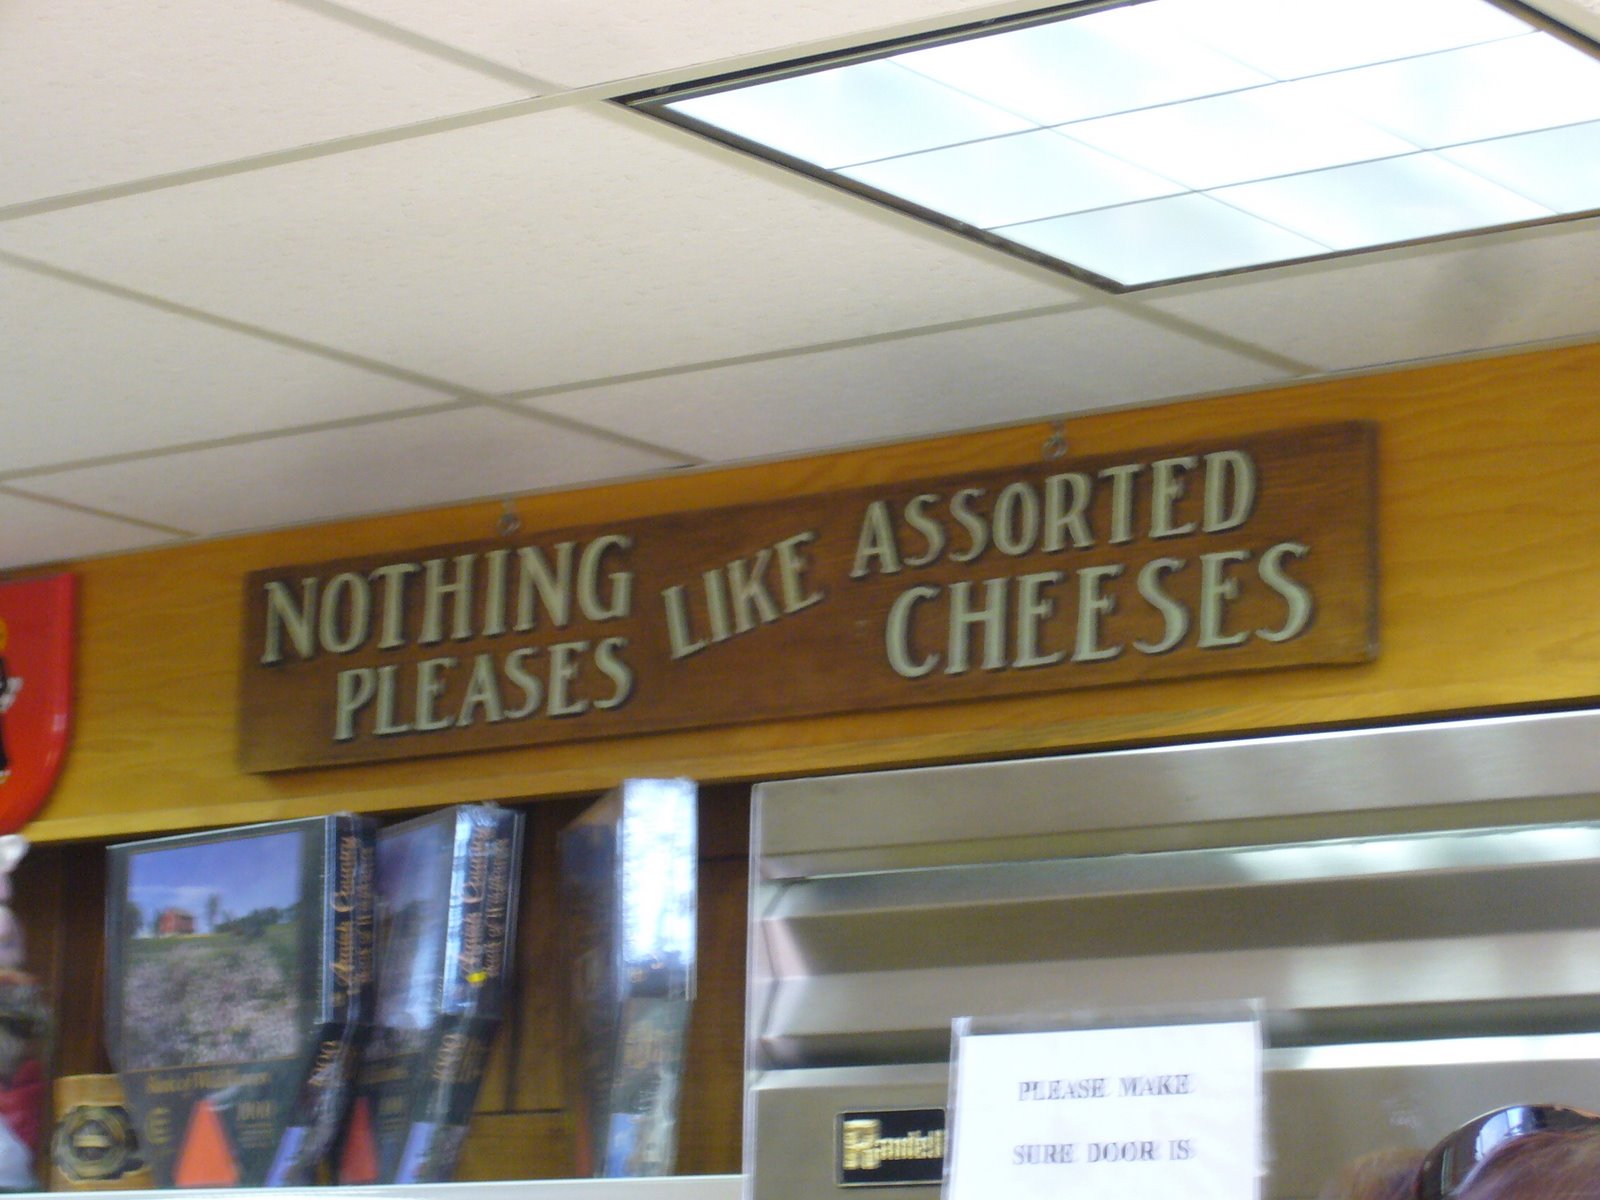 [nothing+pleases+like+assorted+cheeses.jpg]